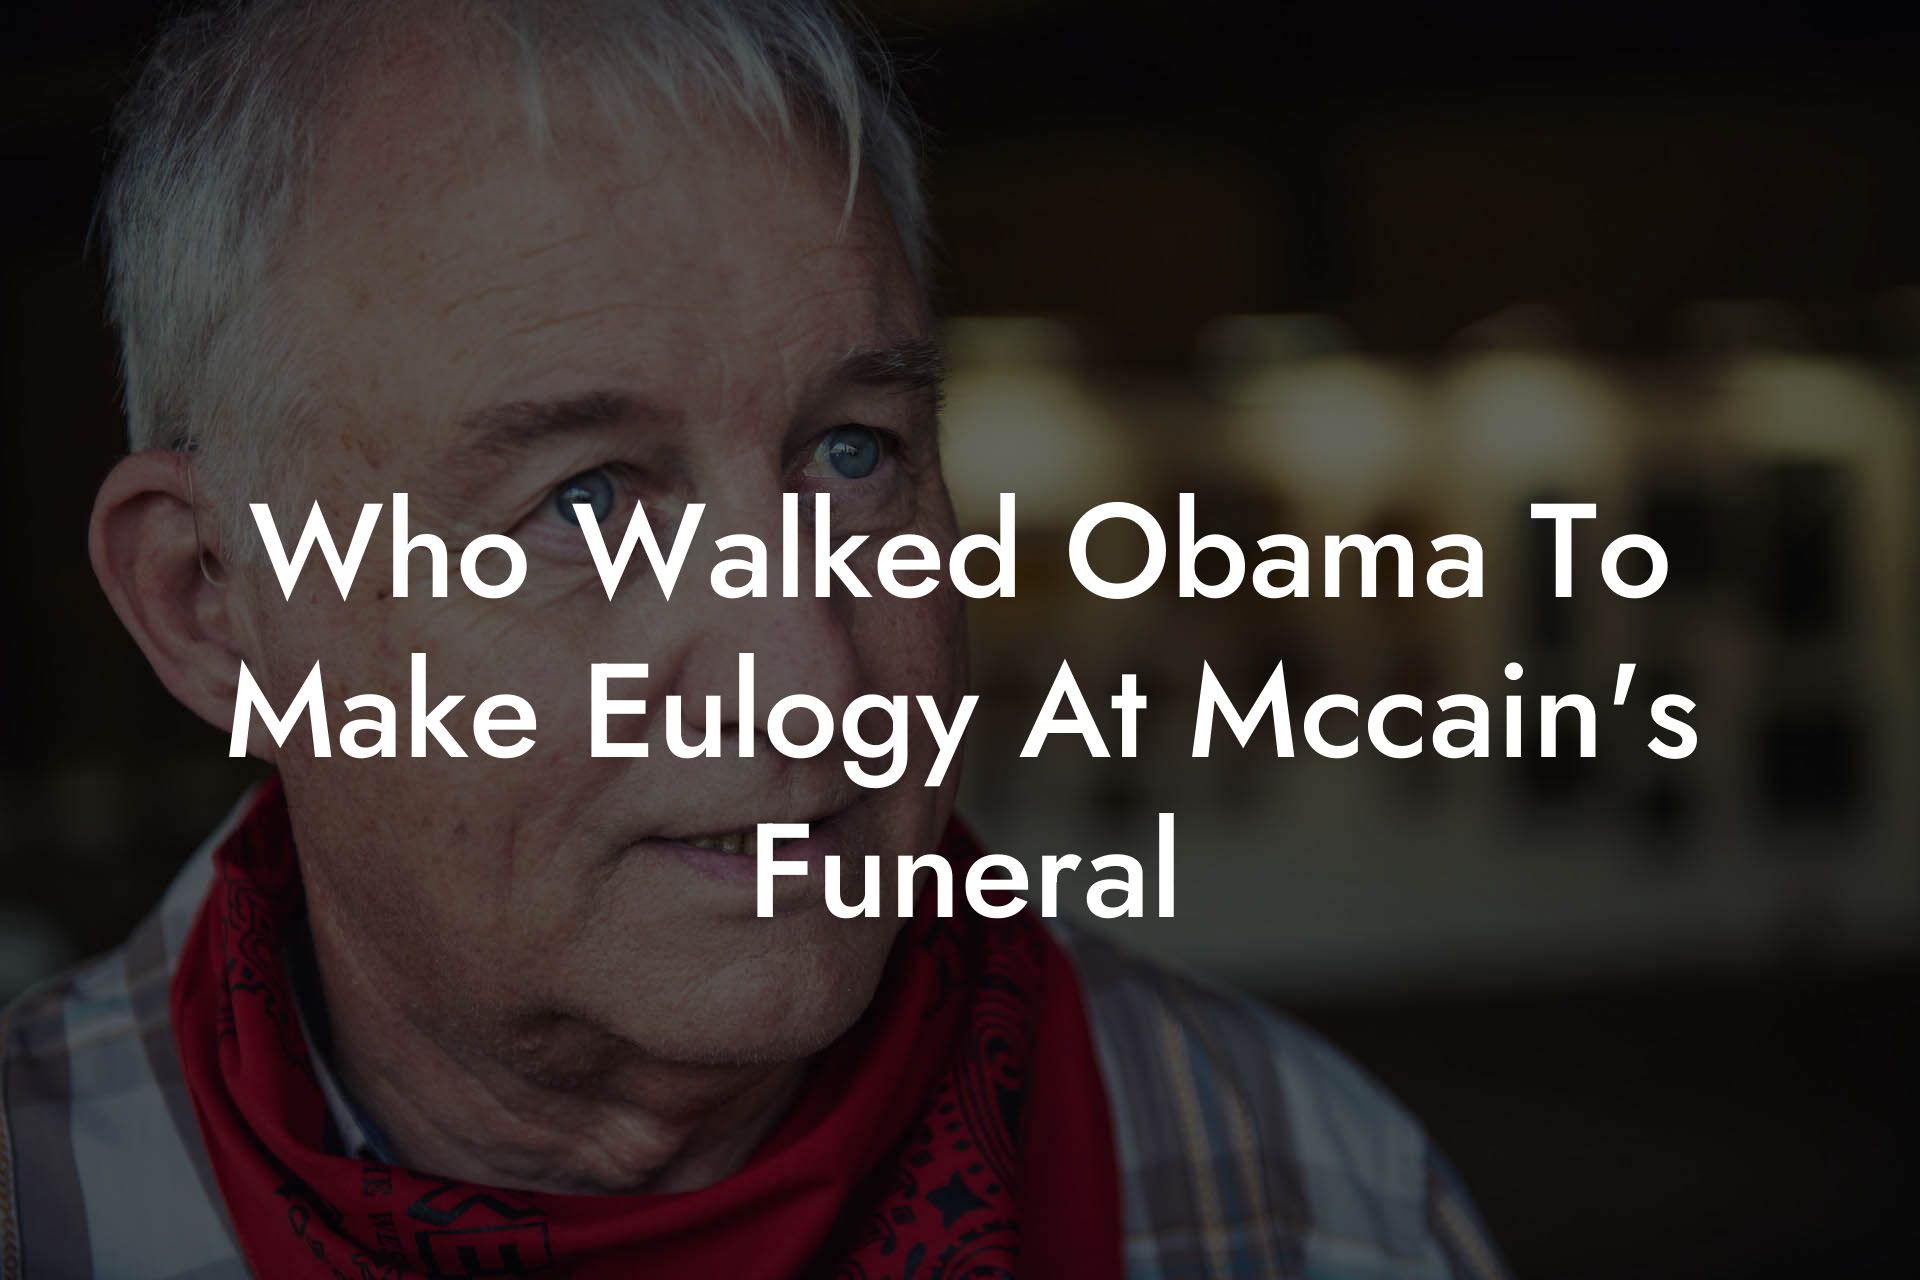 Who Walked Obama To Make Eulogy At Mccain's Funeral